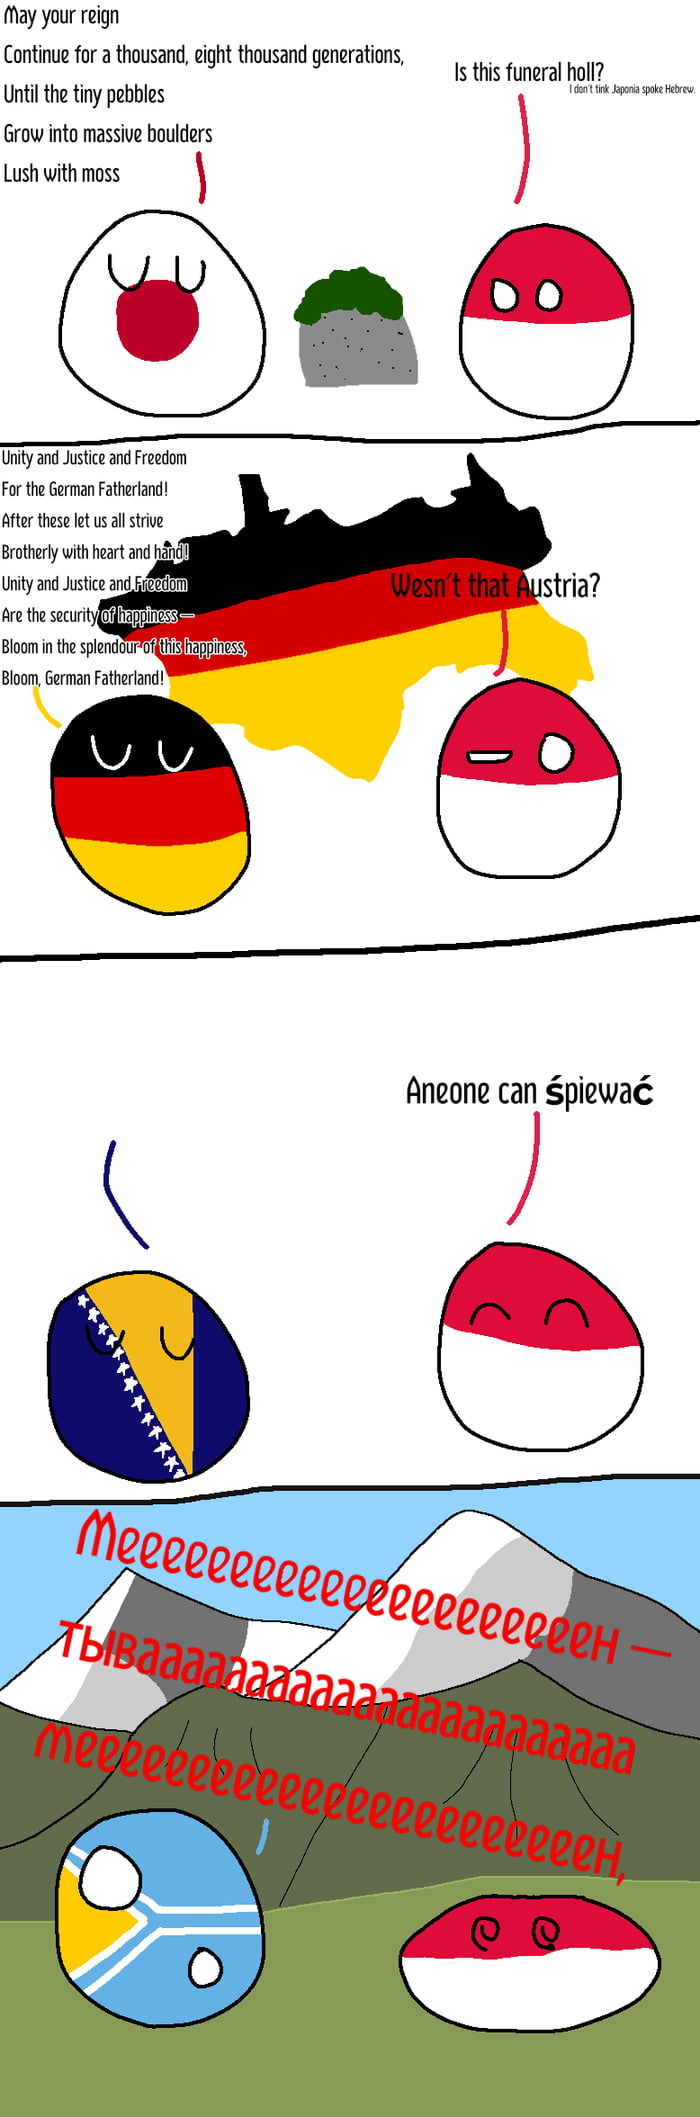 National anthems of various countries